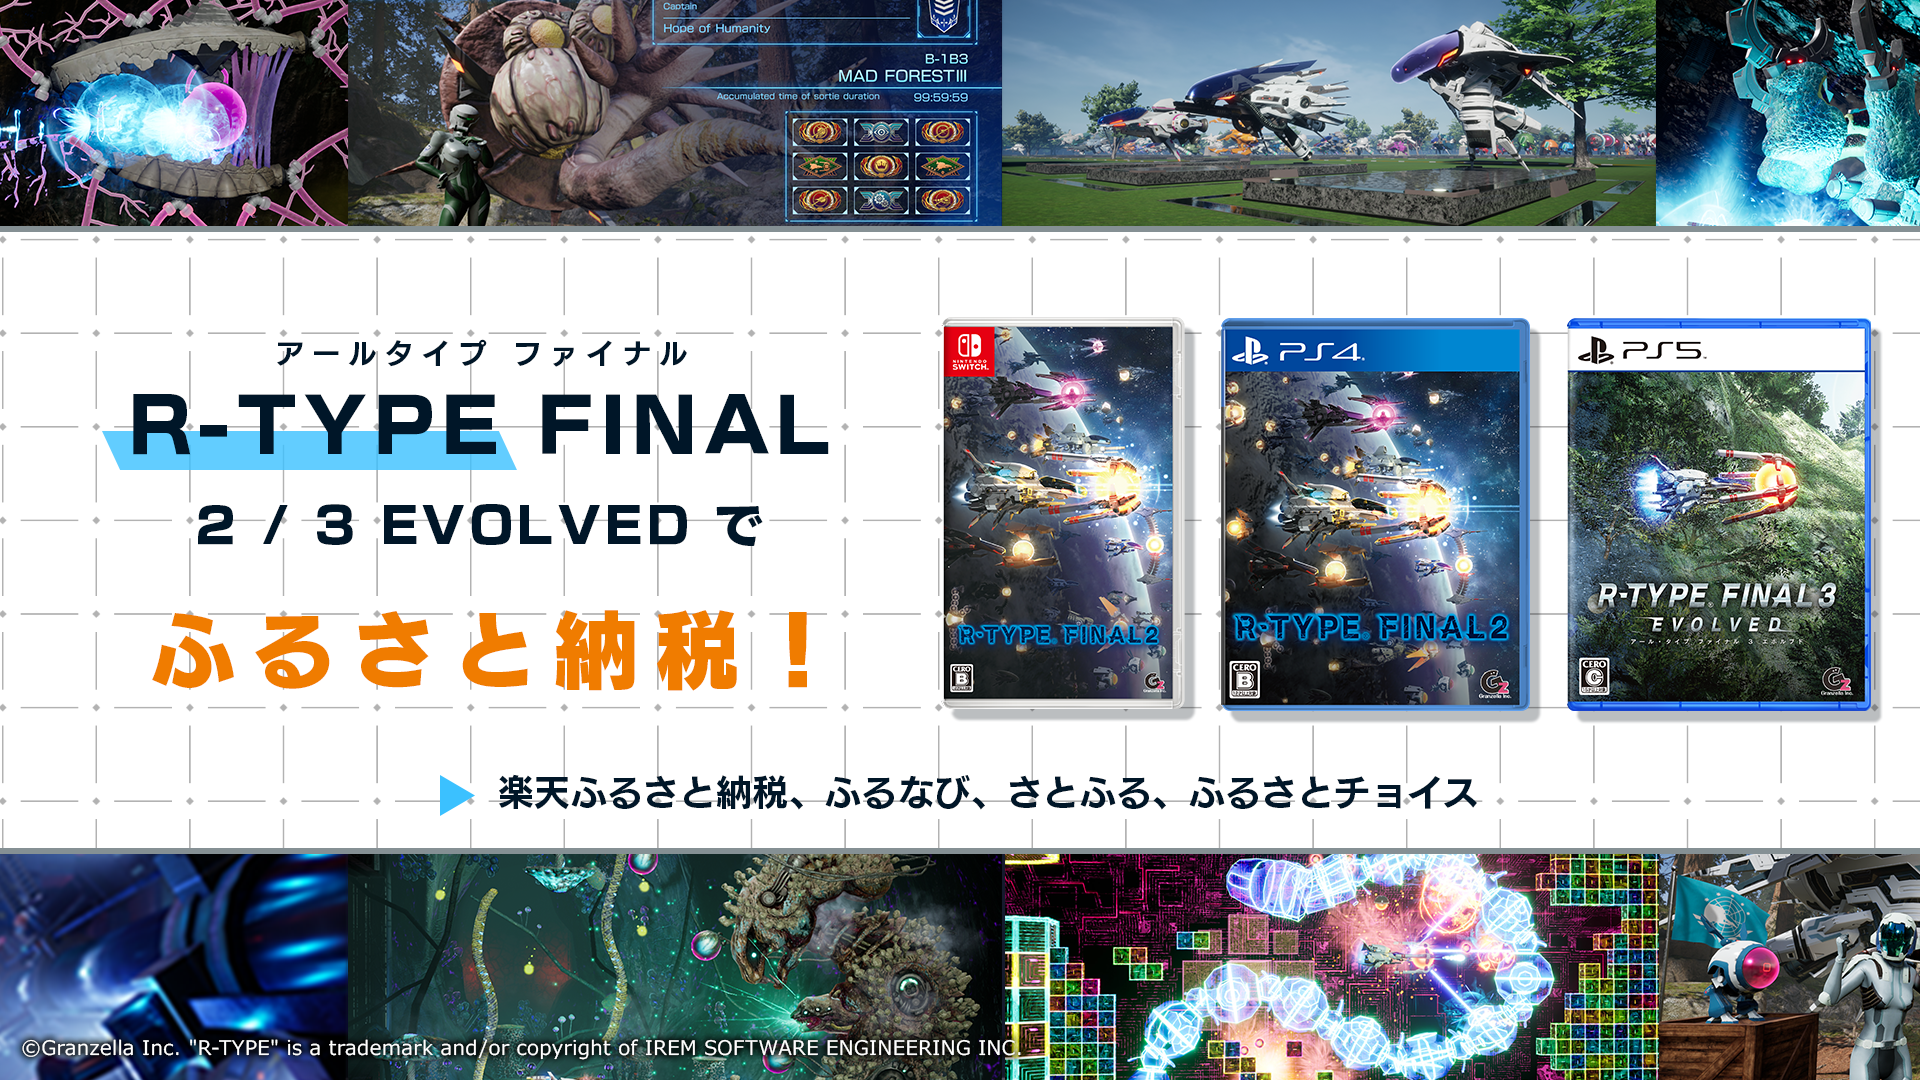 R-TYPE FINAL 2 / 3 EVOLVED で ふるさと納税！